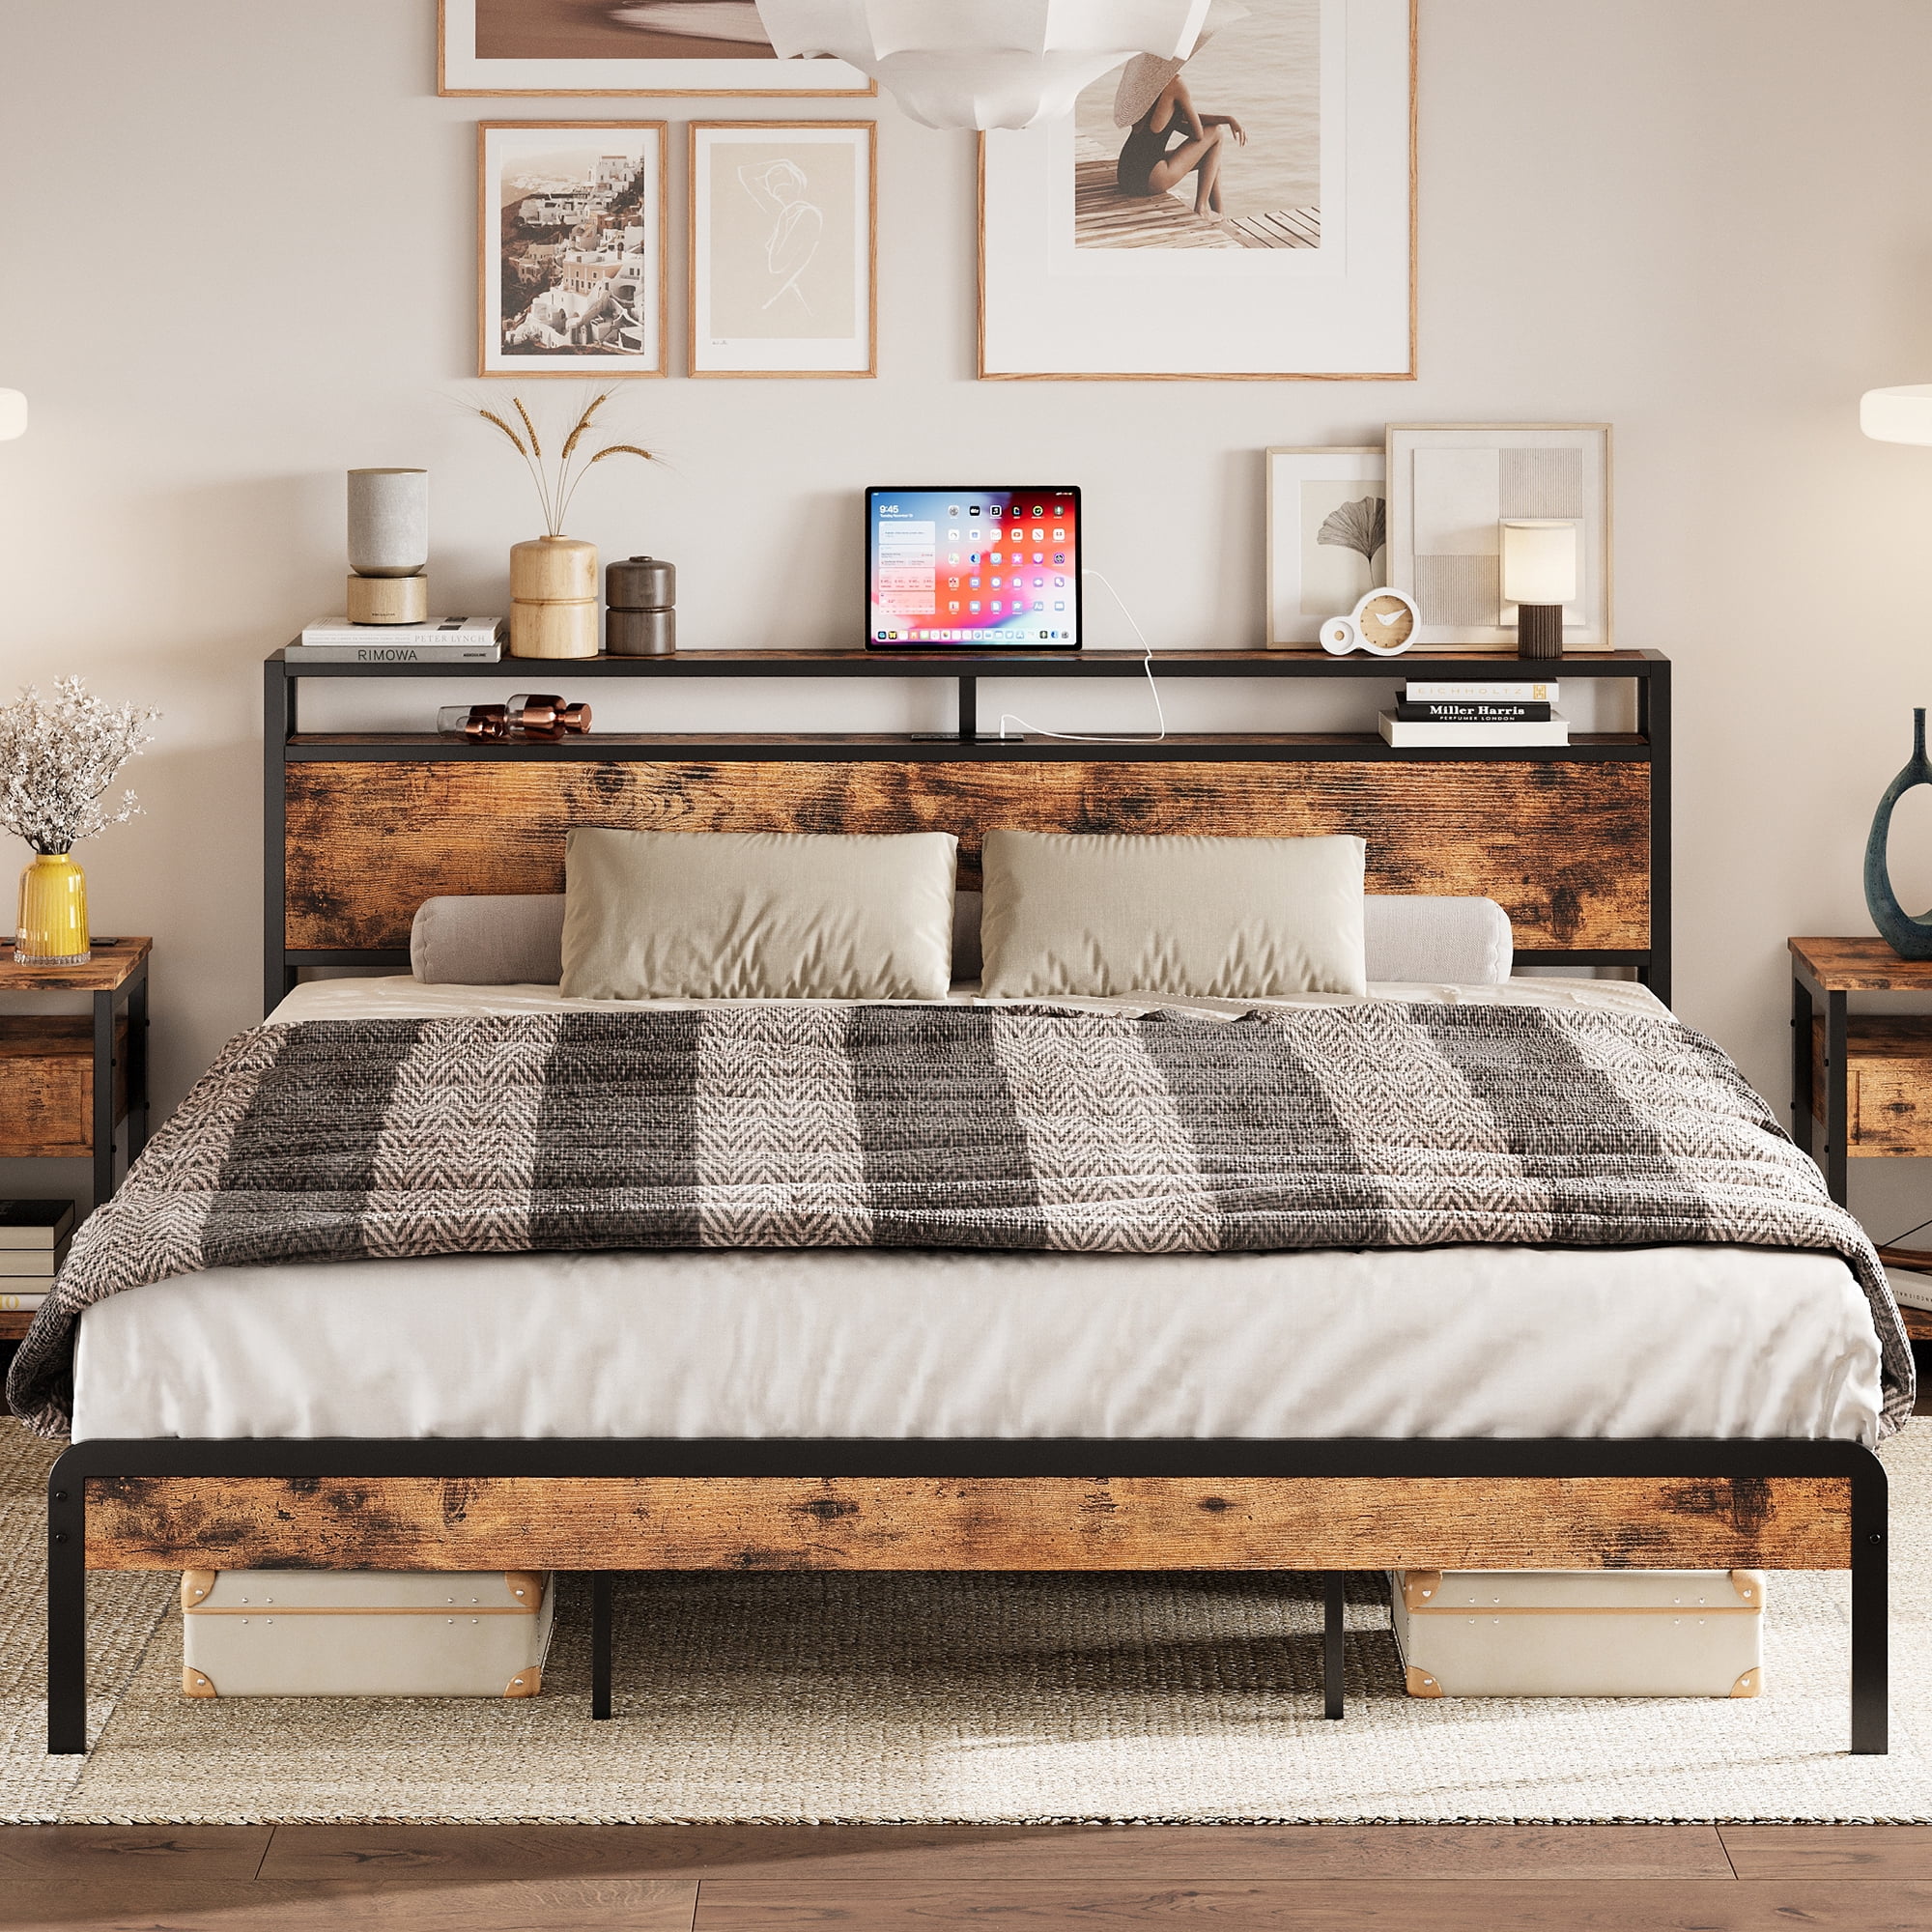 IRONCK California King Bed Frames with Storage Headboard and Charging ...